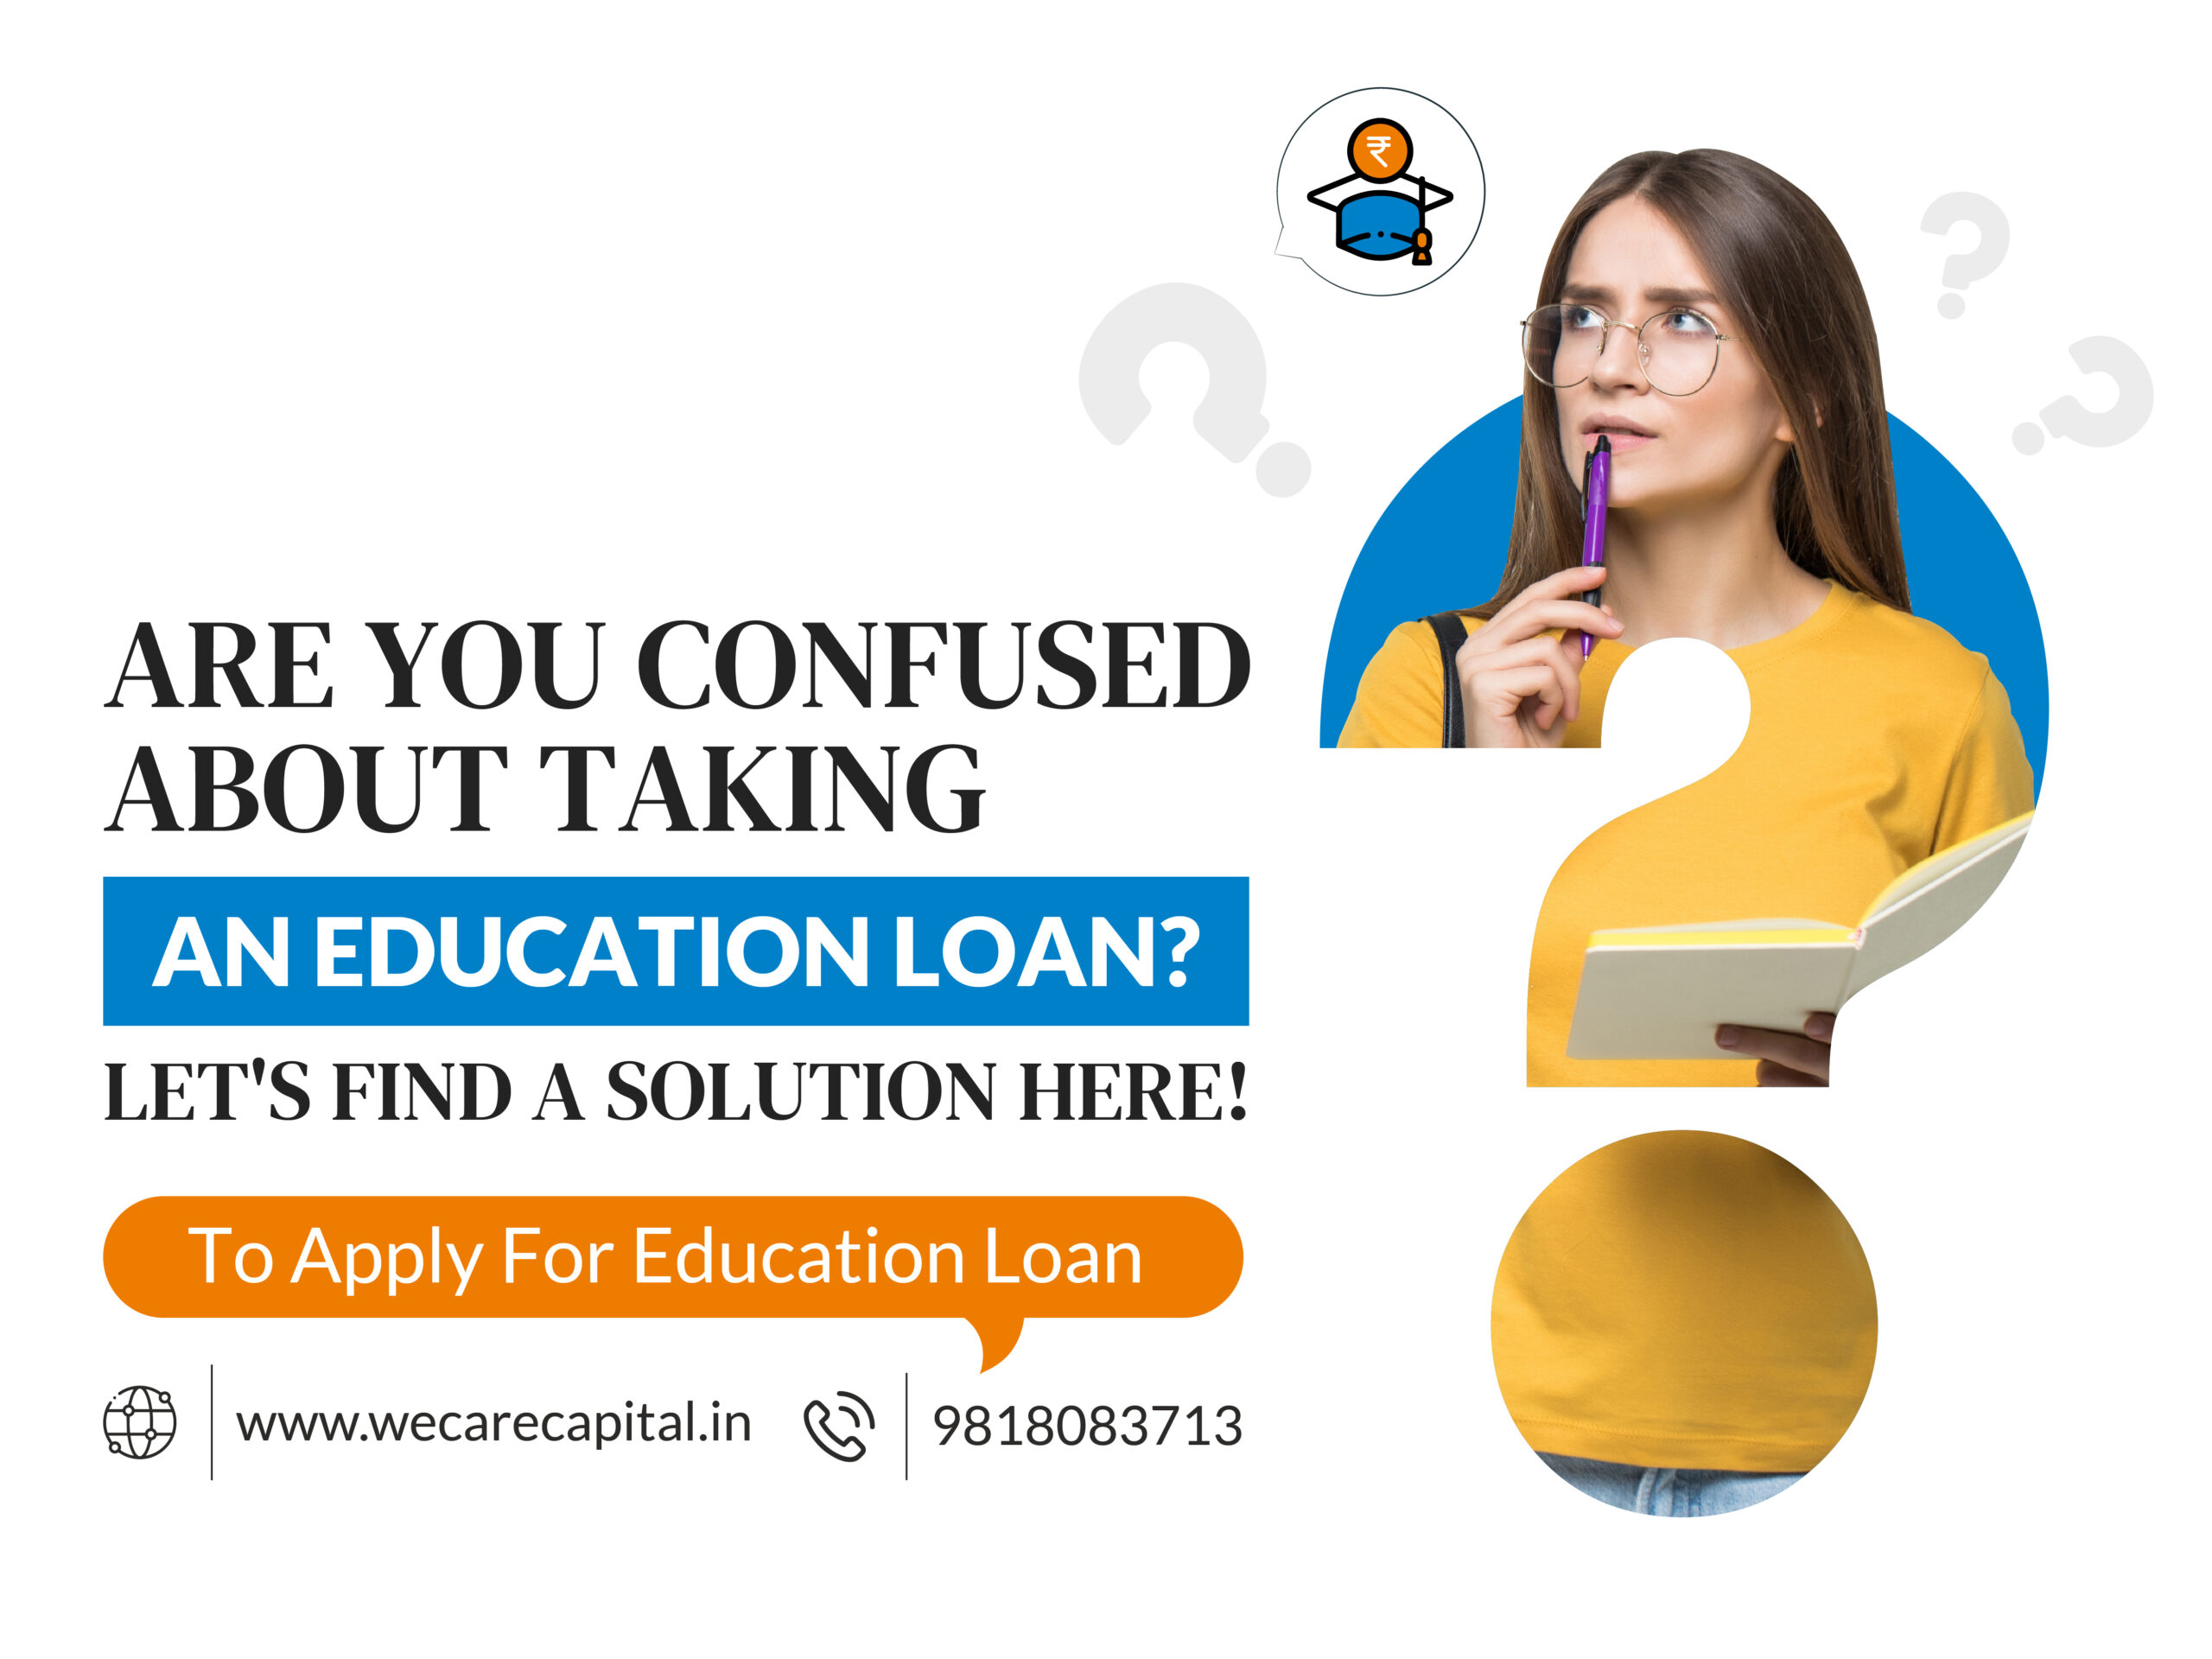 Are You Confused About Taking An Education Loan? Let’s Find A Solution Here!